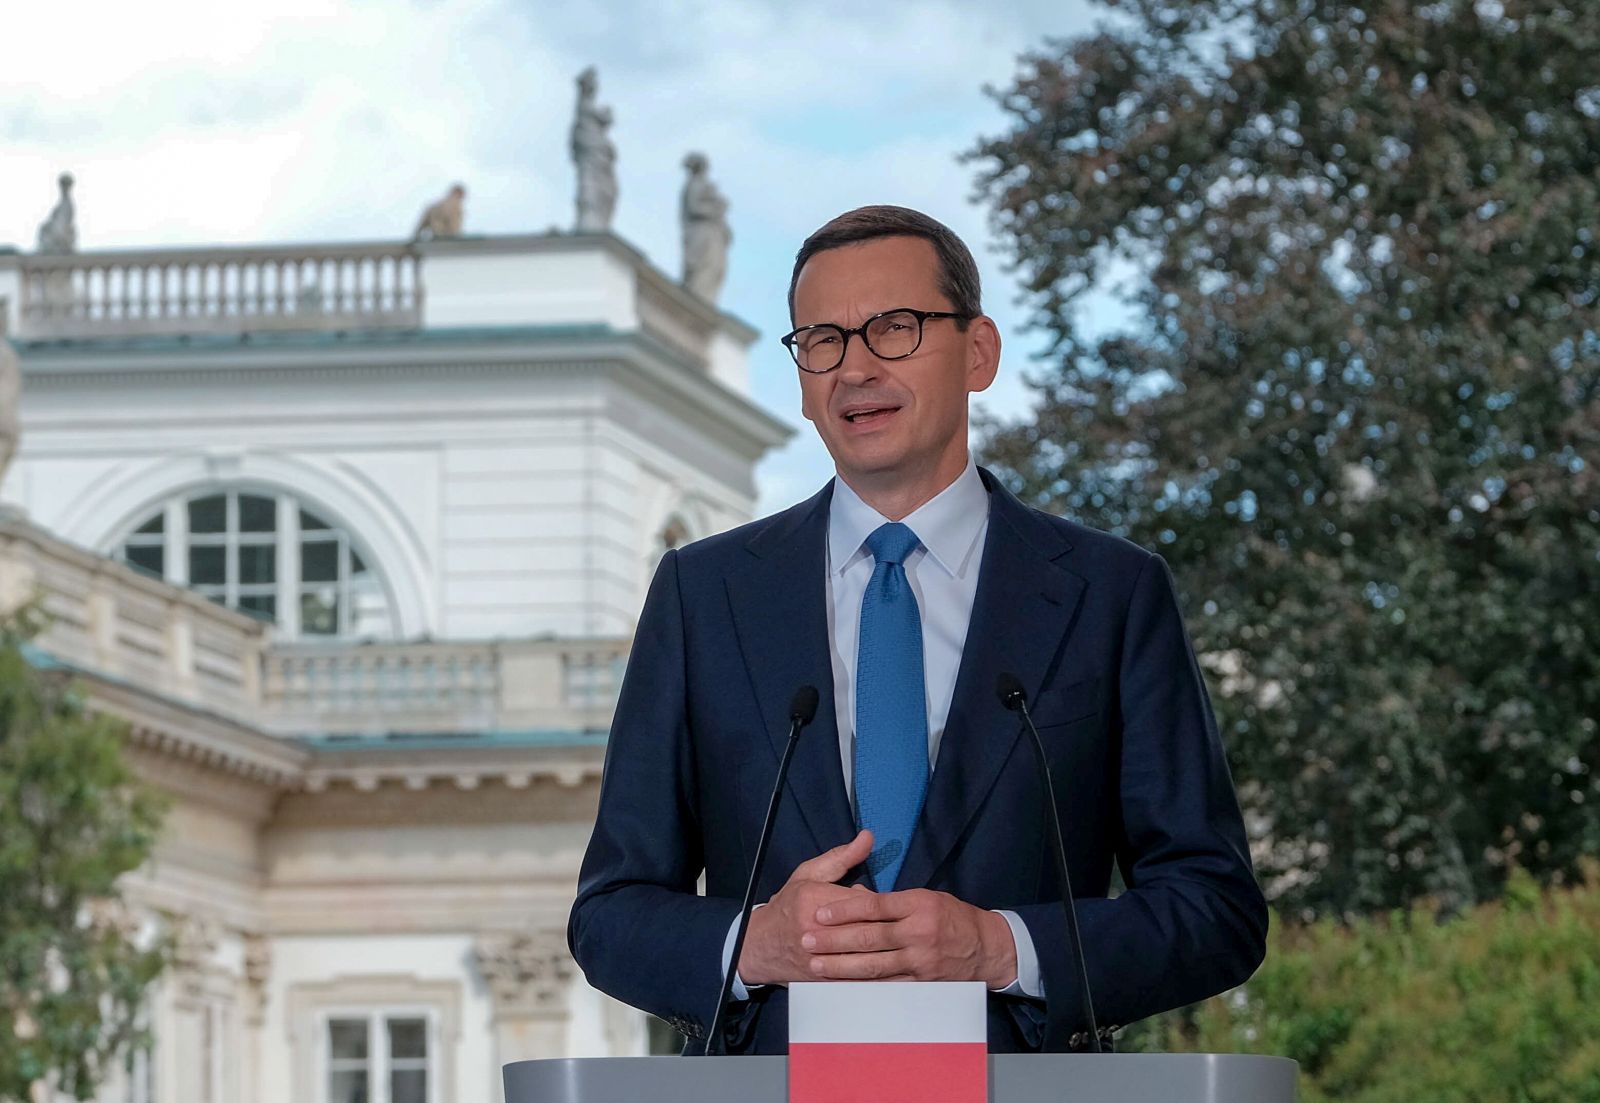 epa10093931 Polish Prime Minister Mateusz Morawiecki (R) and Spanish Prime Minister Pedro Sanchez (L) during a joint press conference at the Palace on the Island at the Royal Lazienki Park in Warsaw, Poland, 27 July 2022. Polish-Spanish intergovernmental consultations are underway.  EPA/MATEUSZ MAREK POLAND OUT